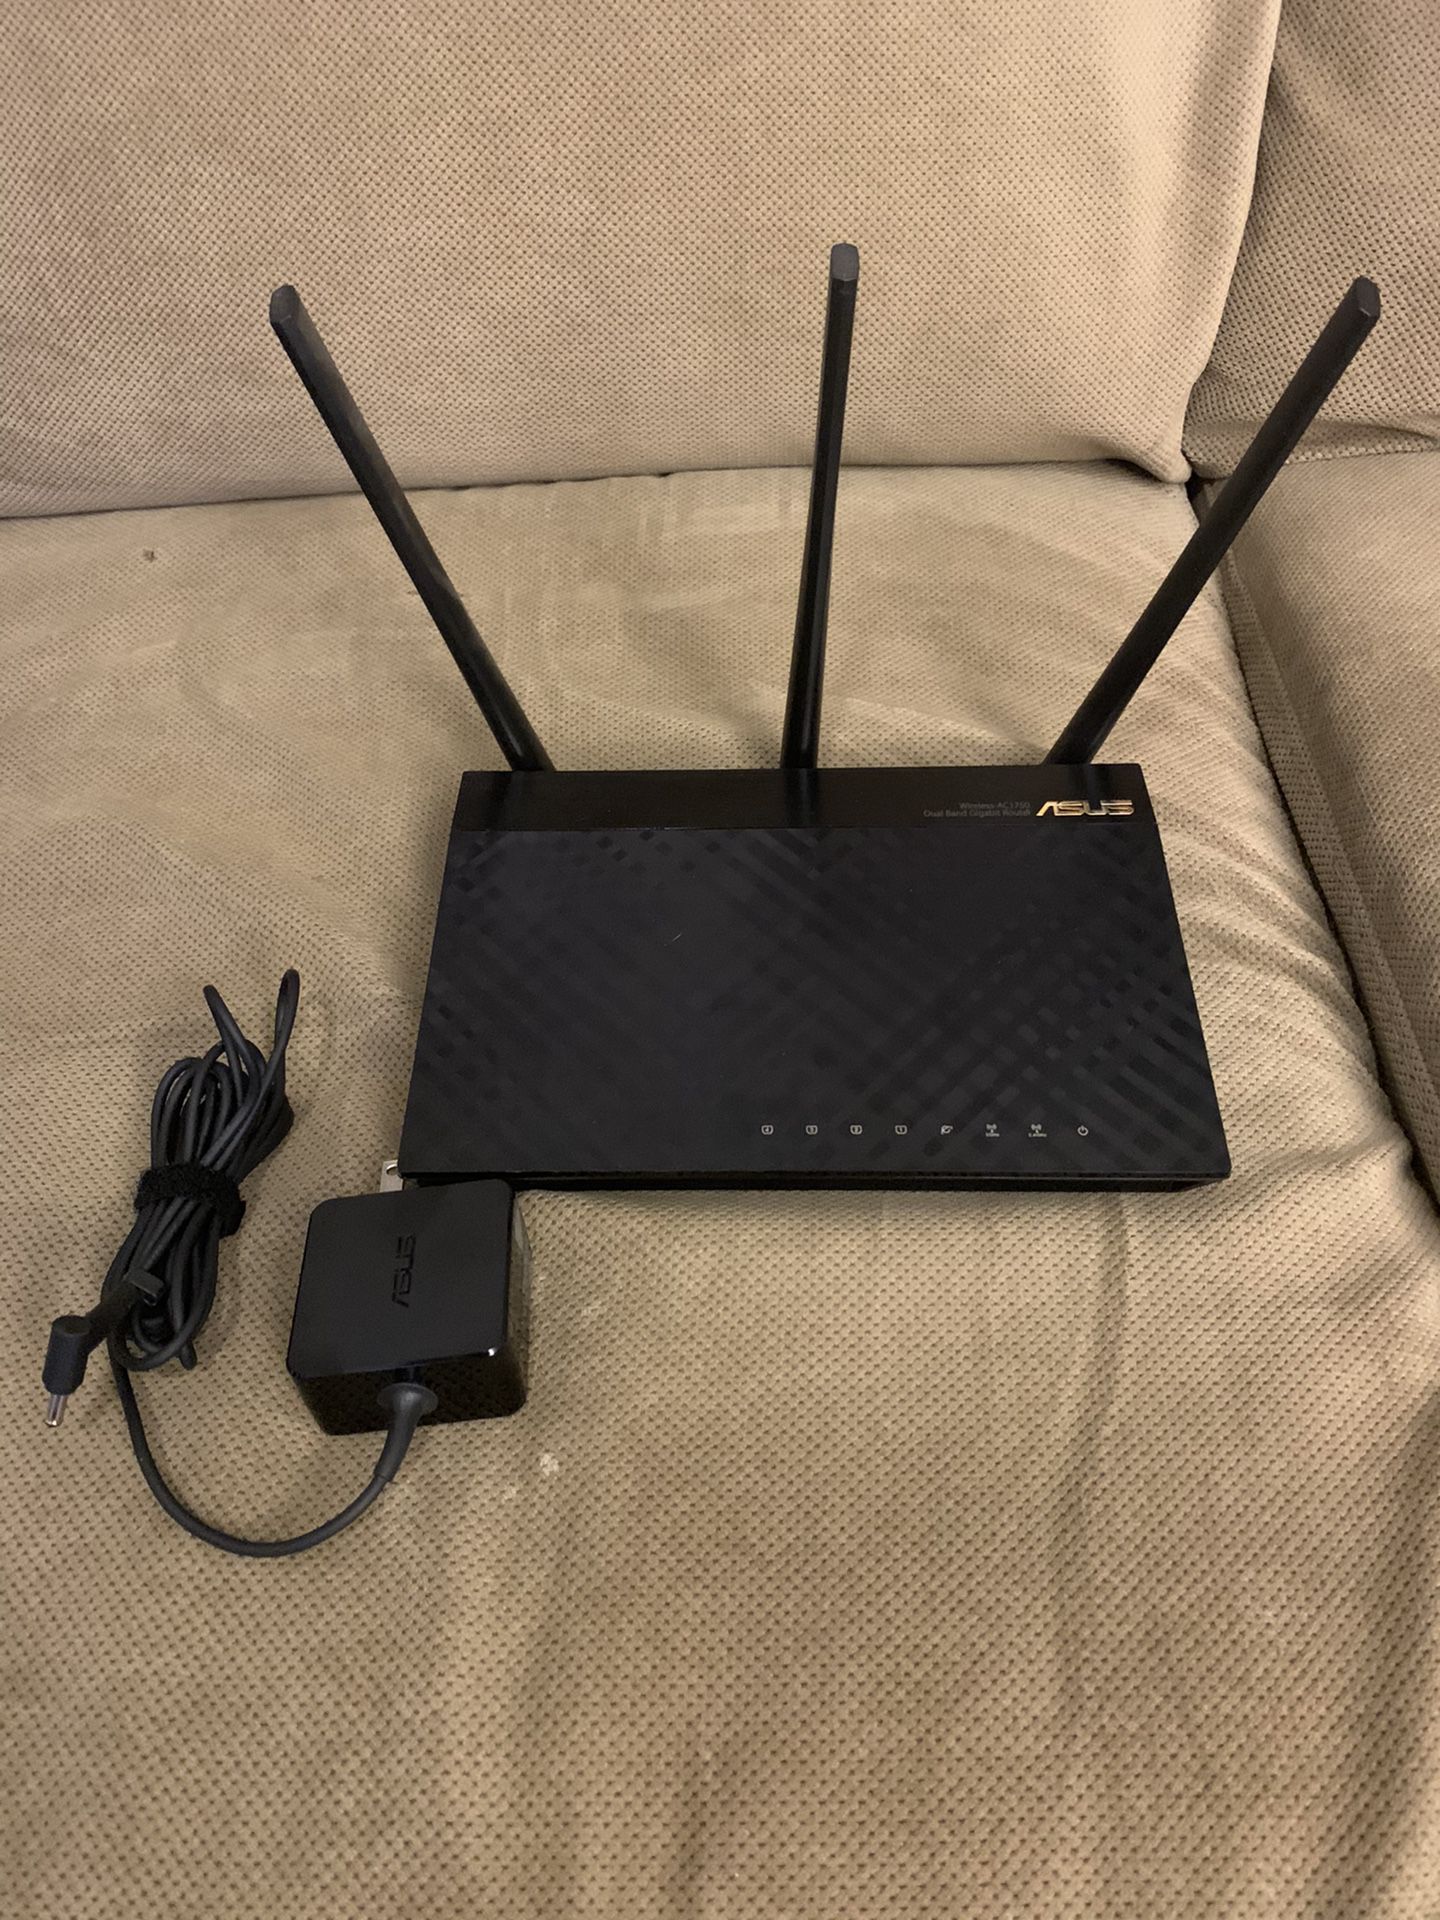 ASUS RT-AC66U B1 Dual-band wireless router